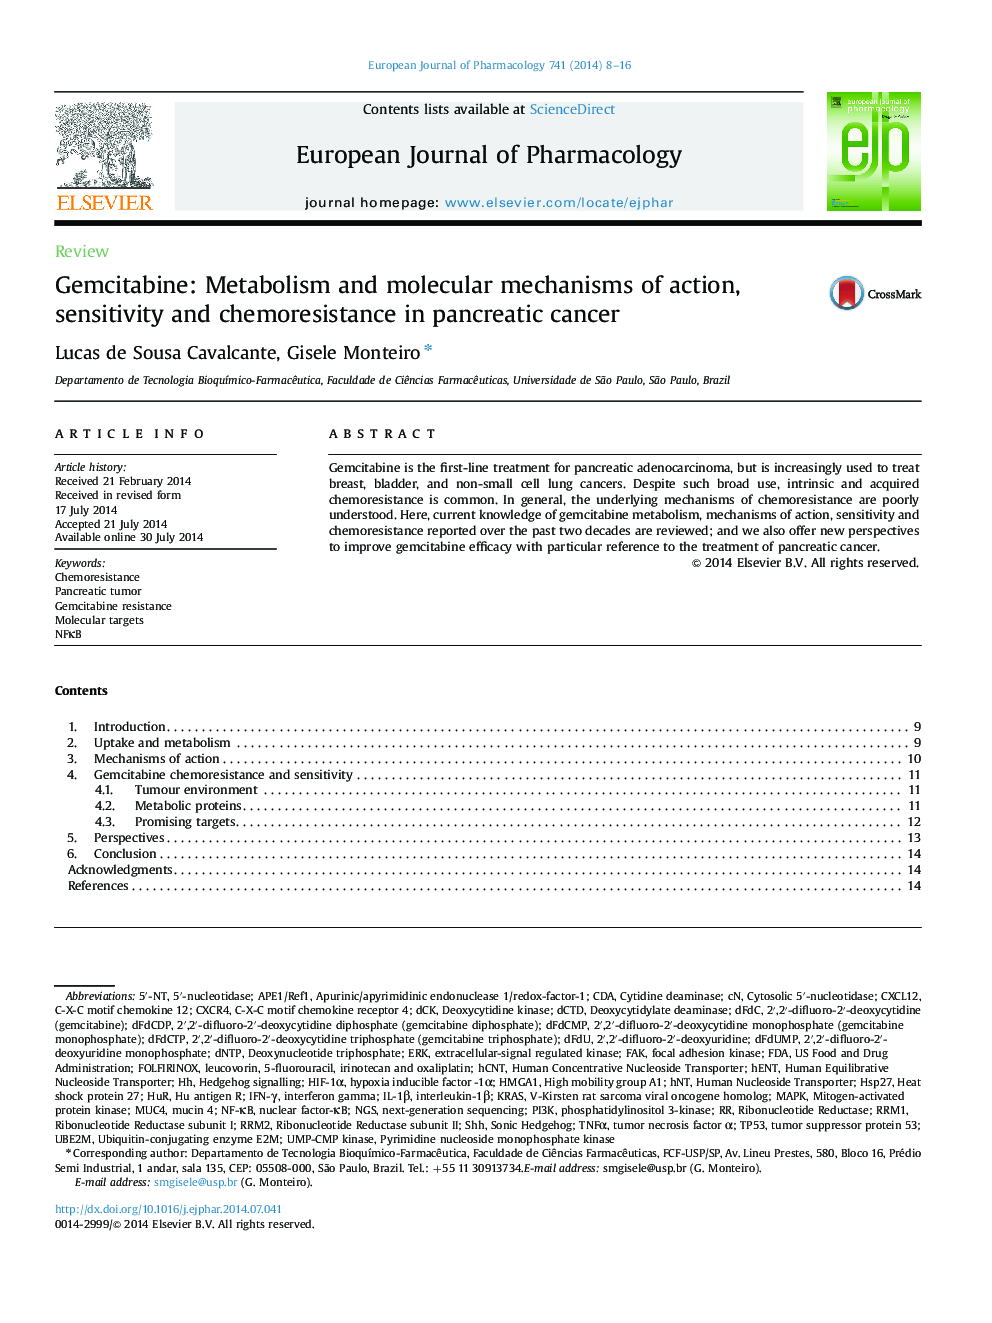 ReviewGemcitabine: Metabolism and molecular mechanisms of action, sensitivity and chemoresistance in pancreatic cancer